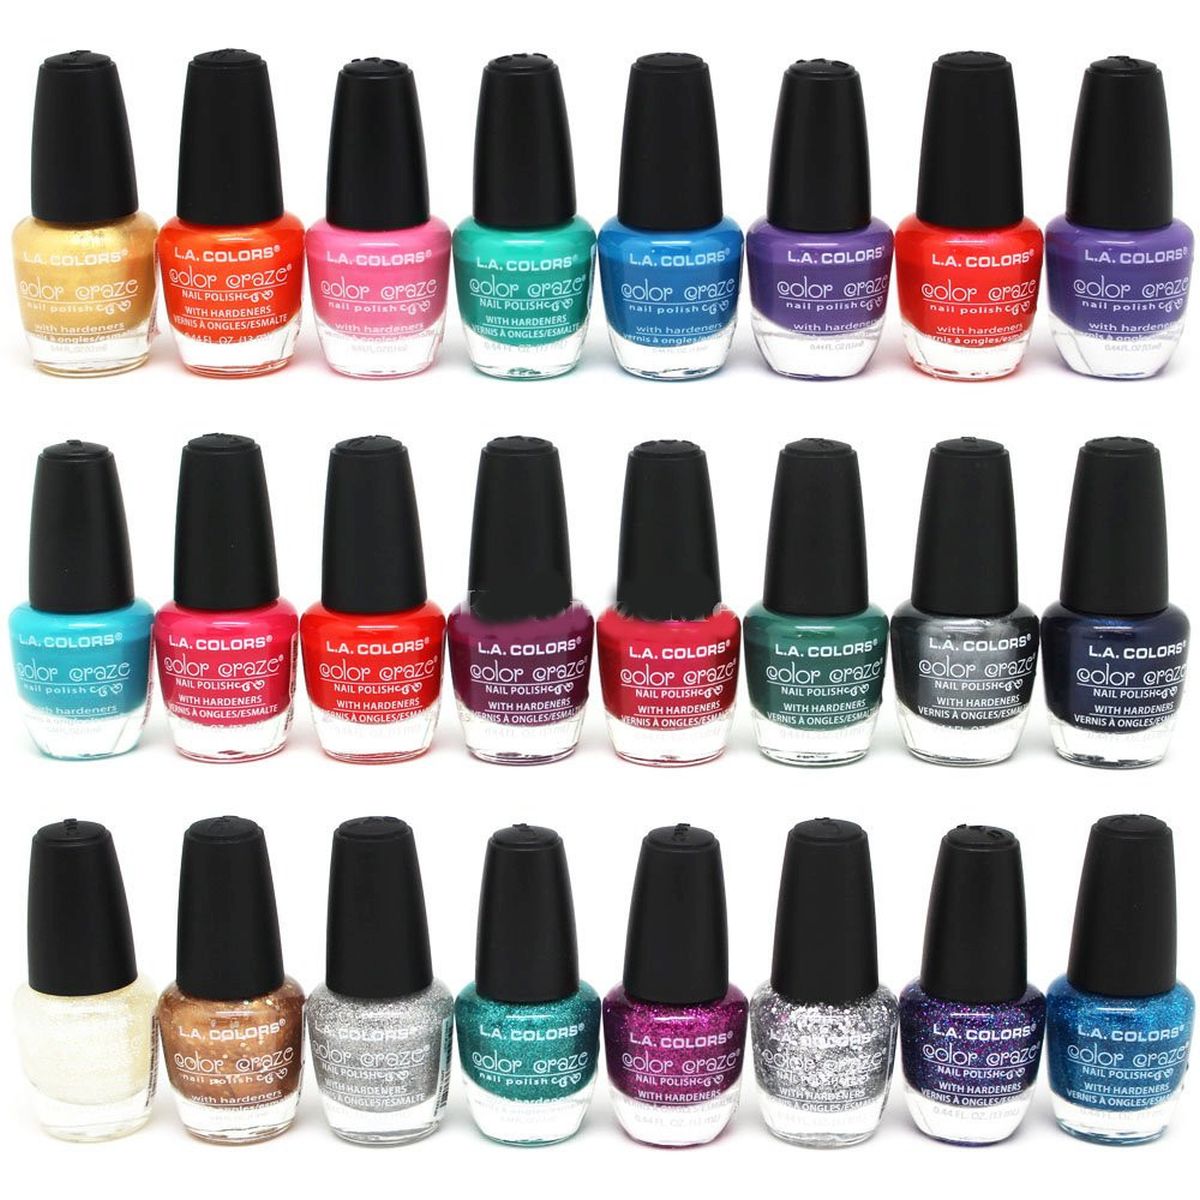 L.A. Colors Craze Colors Nail Polish With Hardeners - CheapoGood